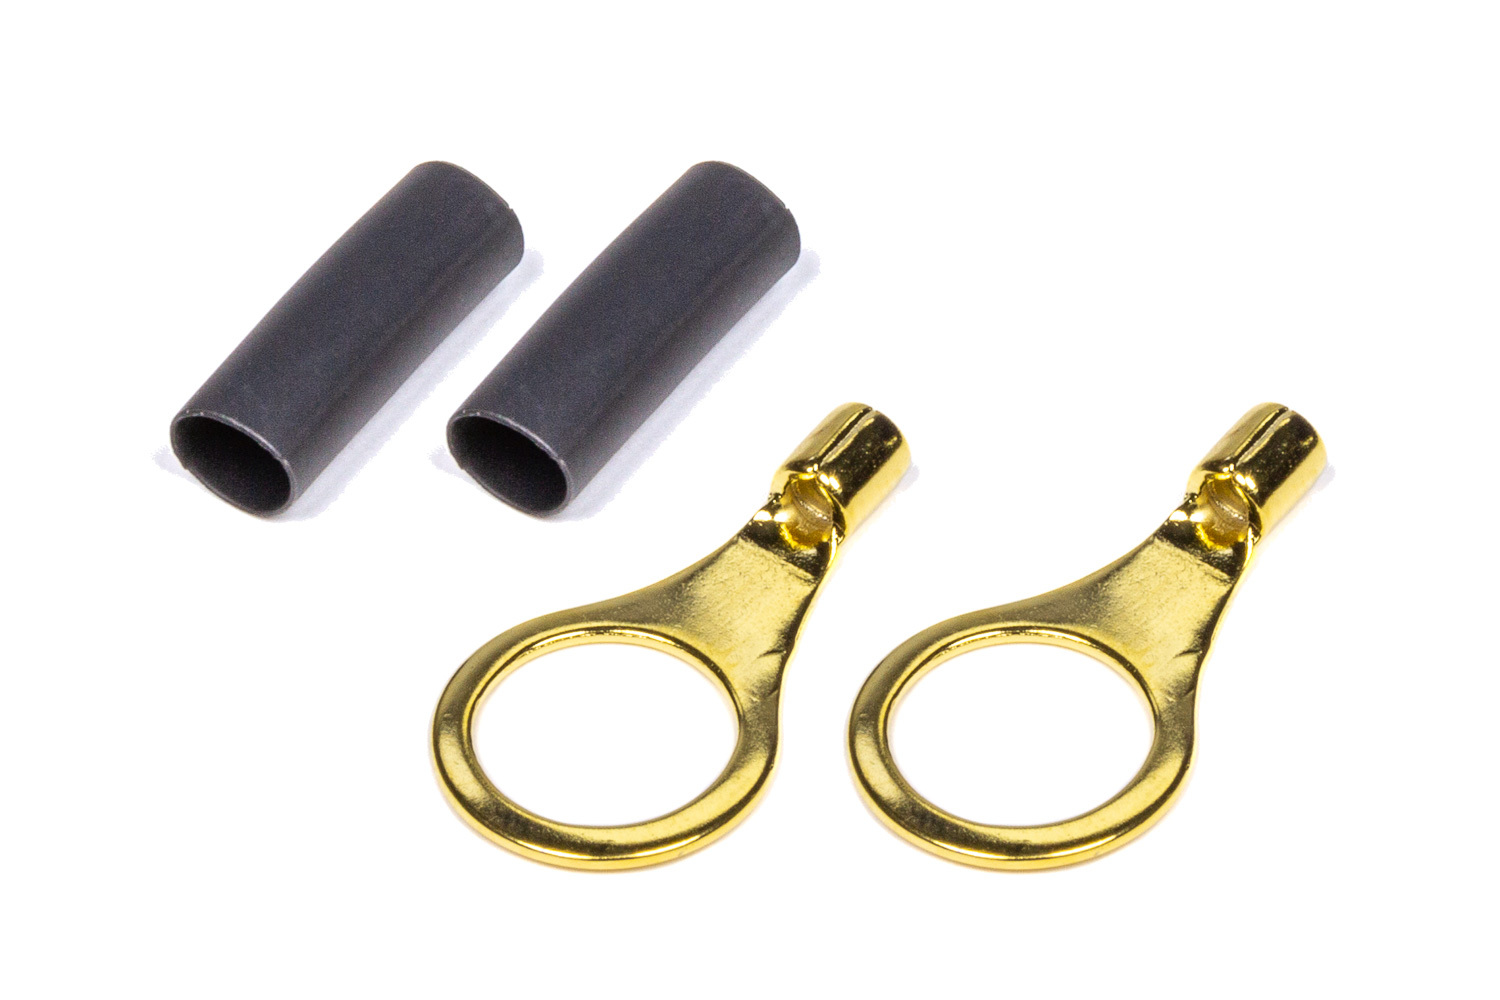 QuickCar 57-473 Ring Terminal, Power Rings, Heat Shrink Included, 16-14 Gauge Wire, 3/8 in Hole, Copper, Pair